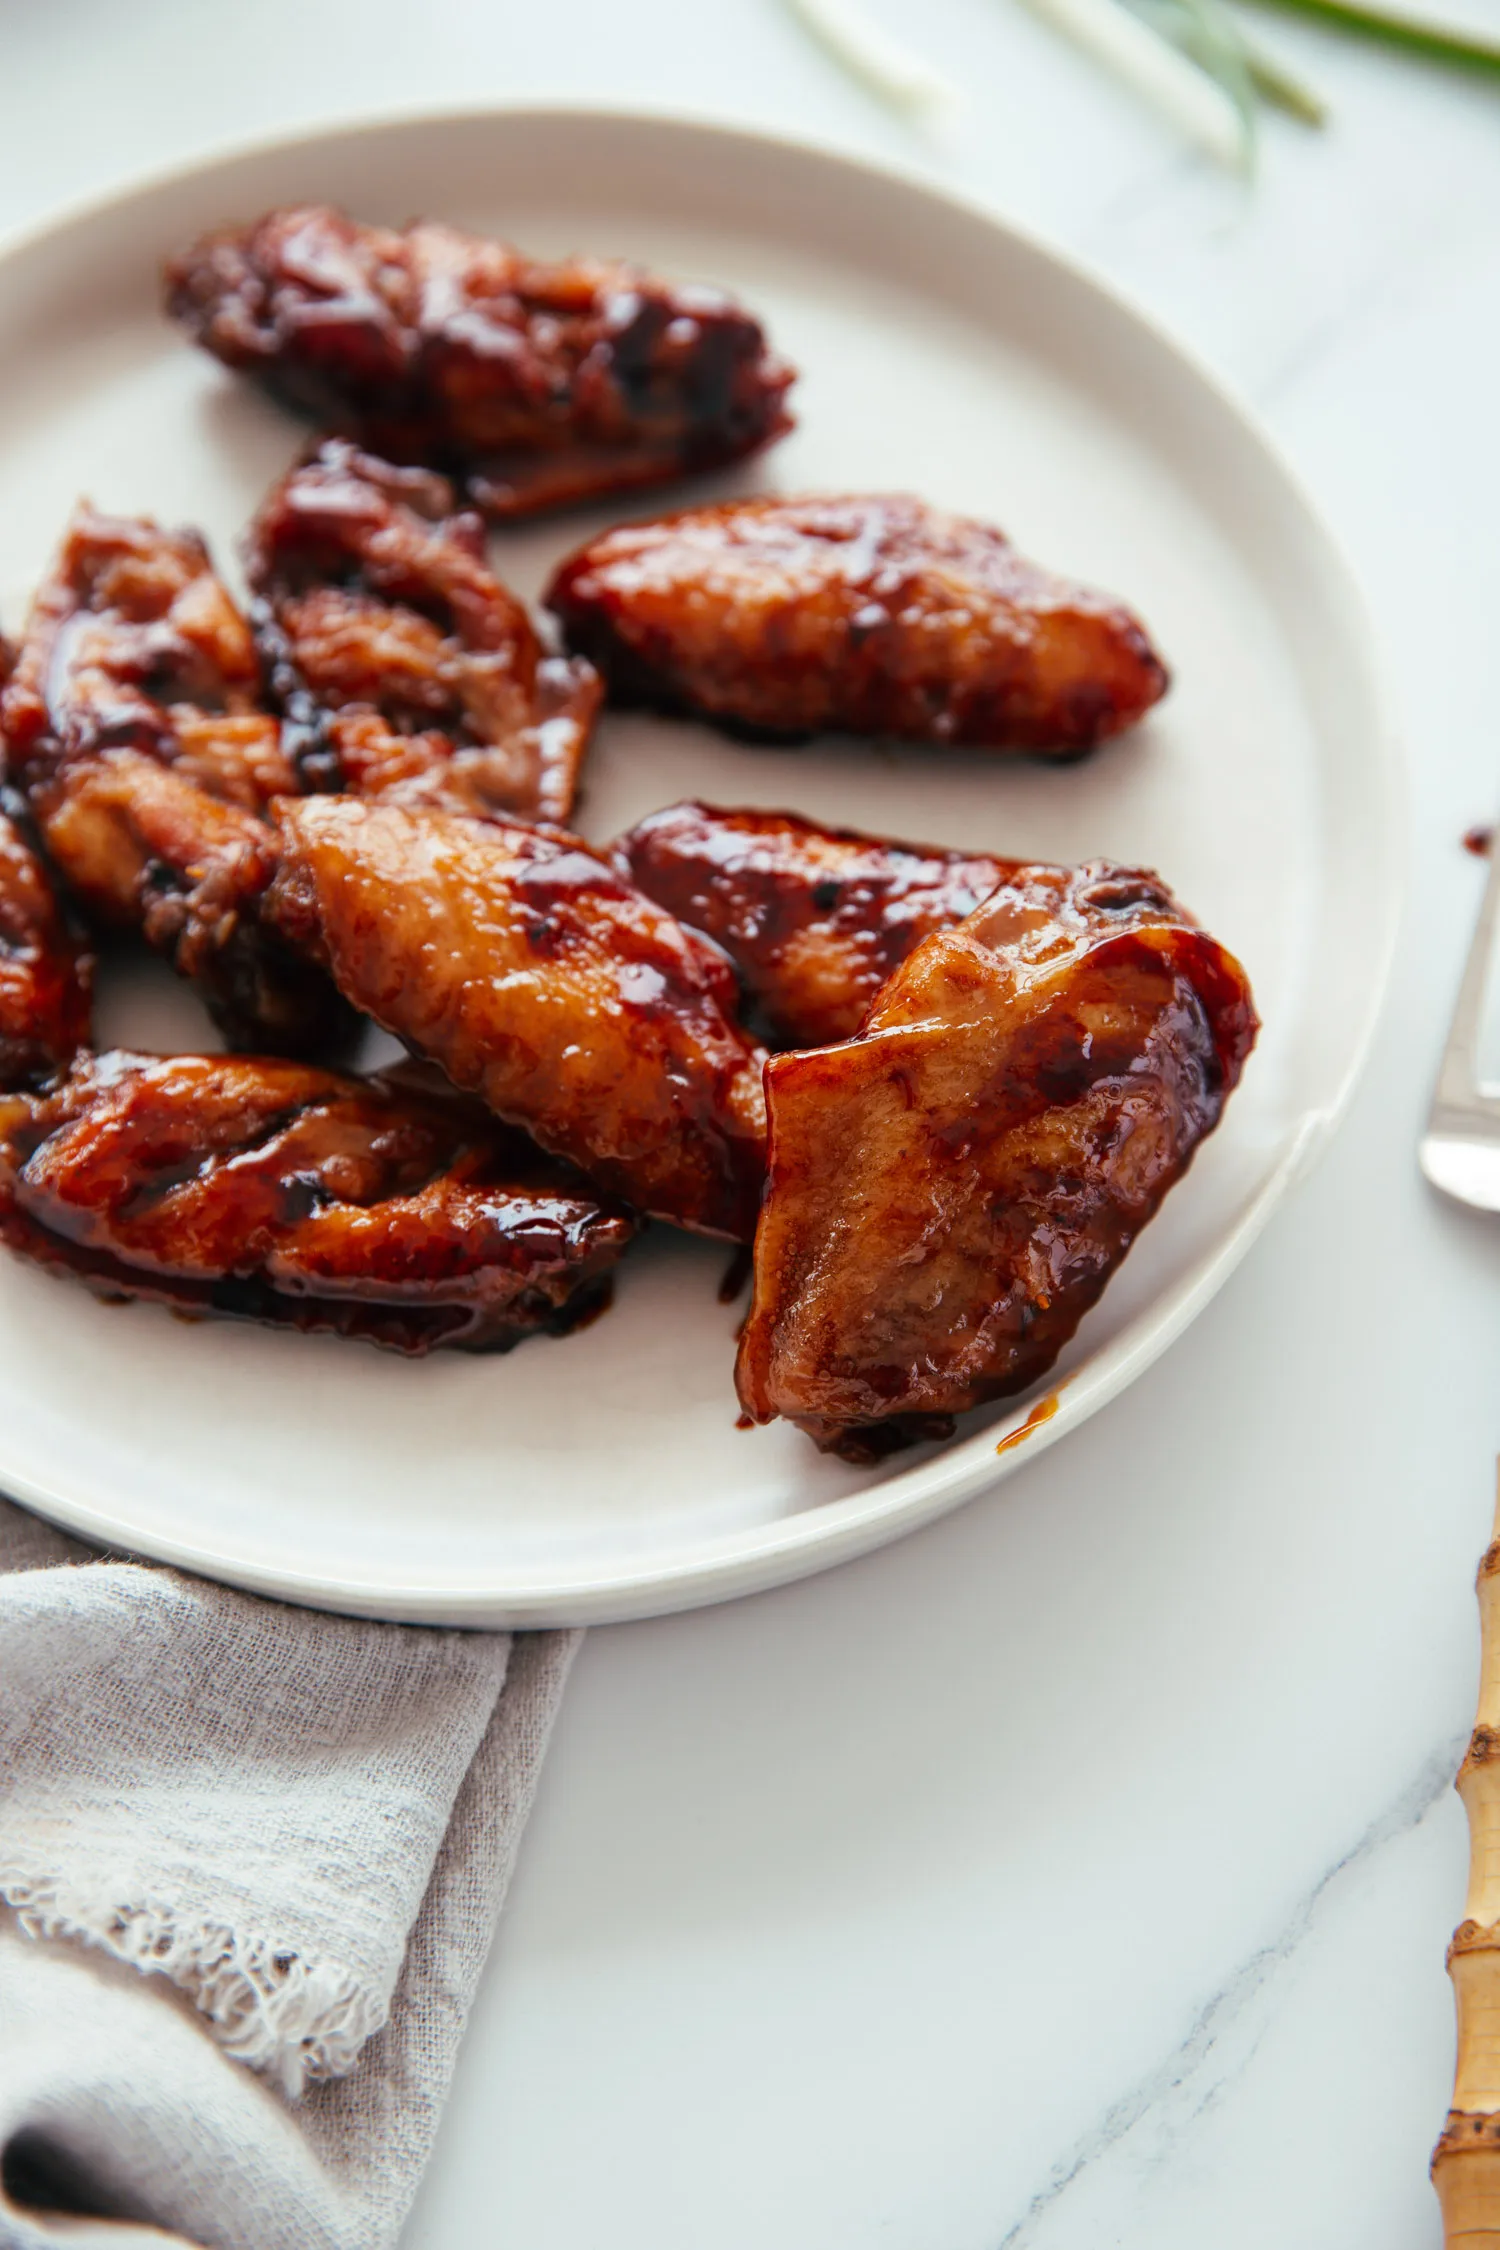 https://www.chinasichuanfood.com/coca-cola-chicken-wings/coca cola chicken wings